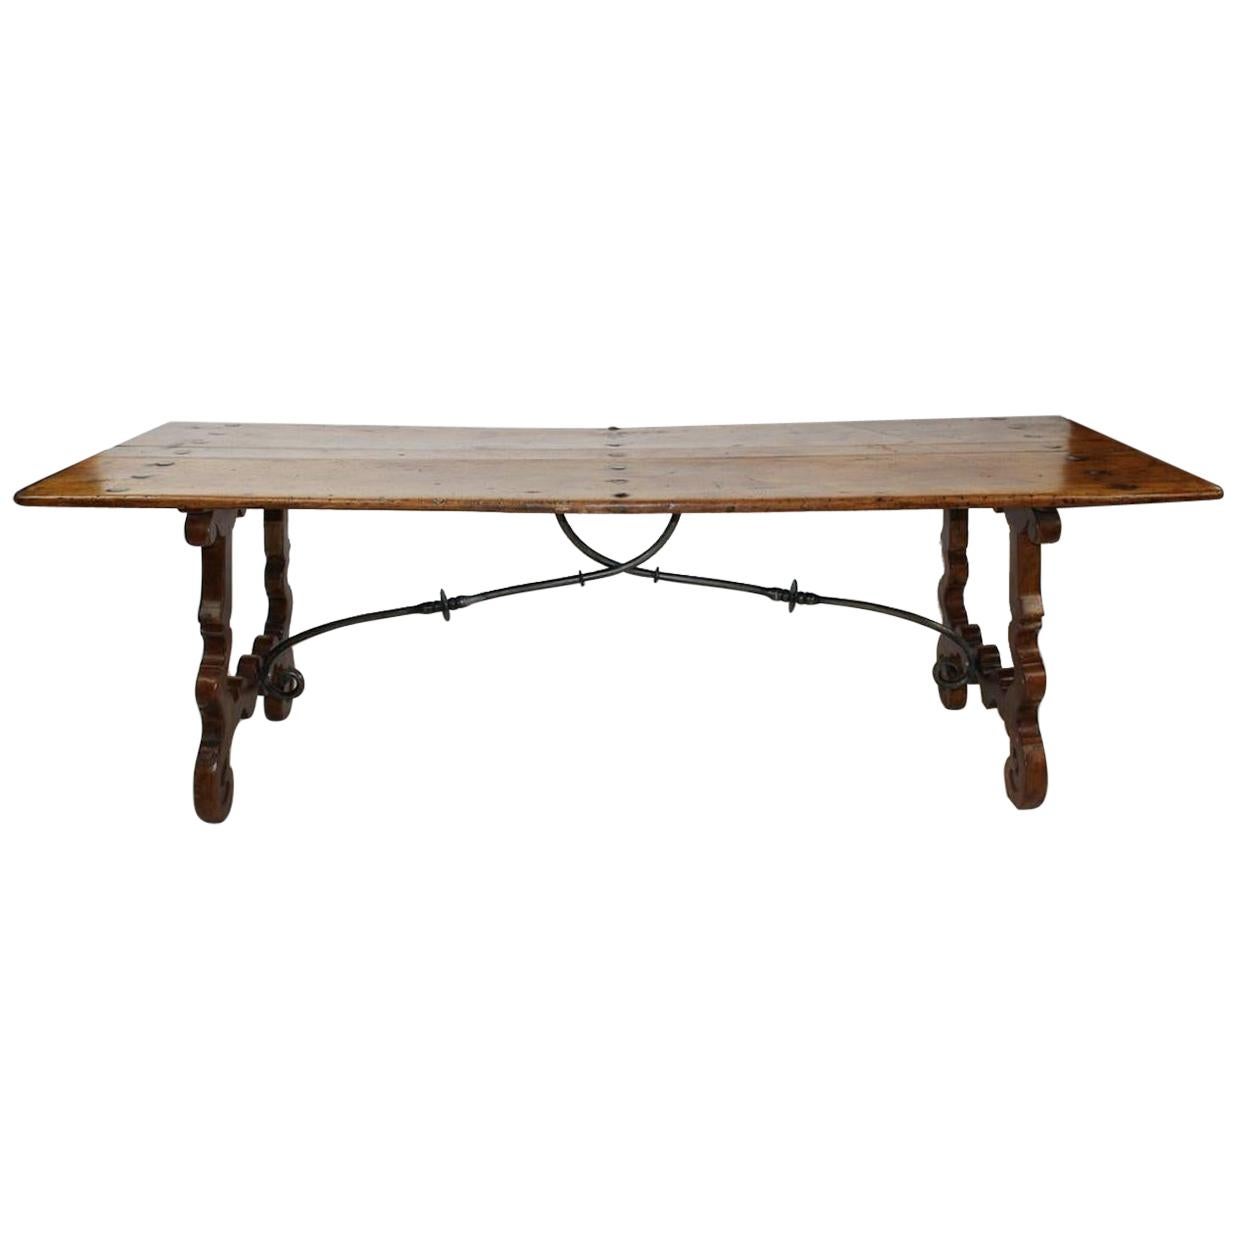 18th century continental refectory table with beautiful original wood top and iron stretchers.